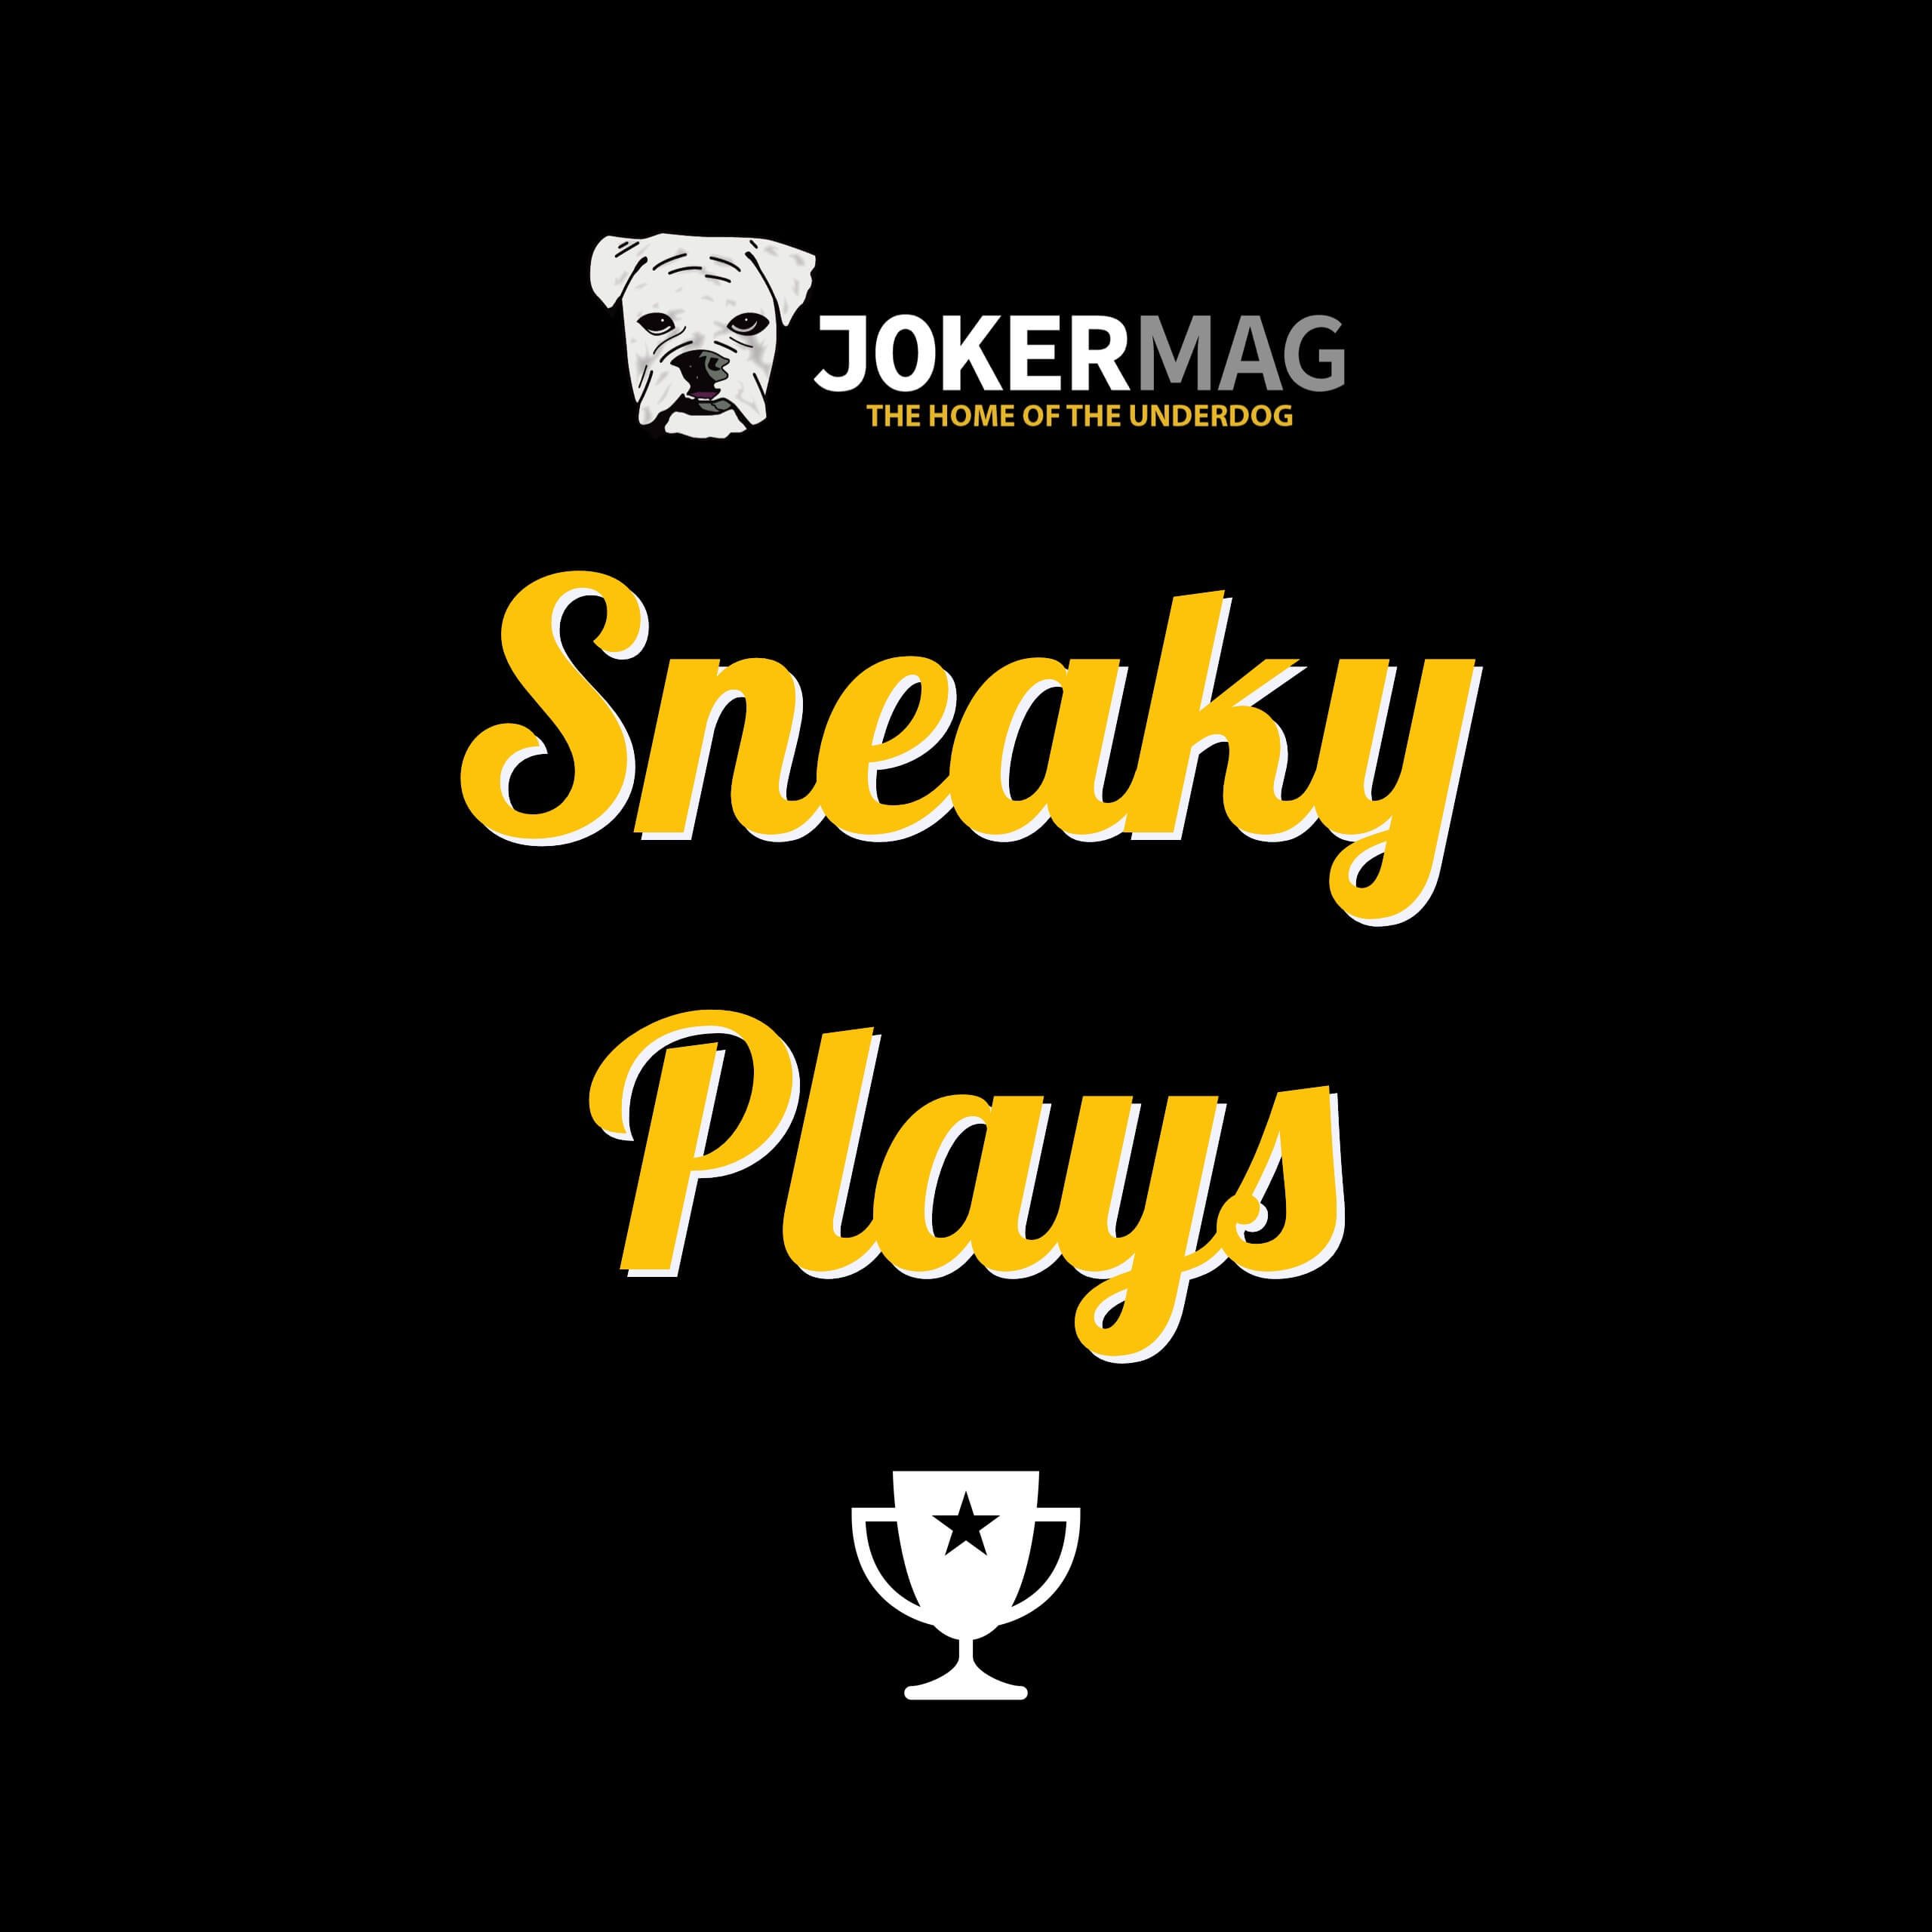 Sneaky Plays presented by JokerMag.com, the home of the underdog